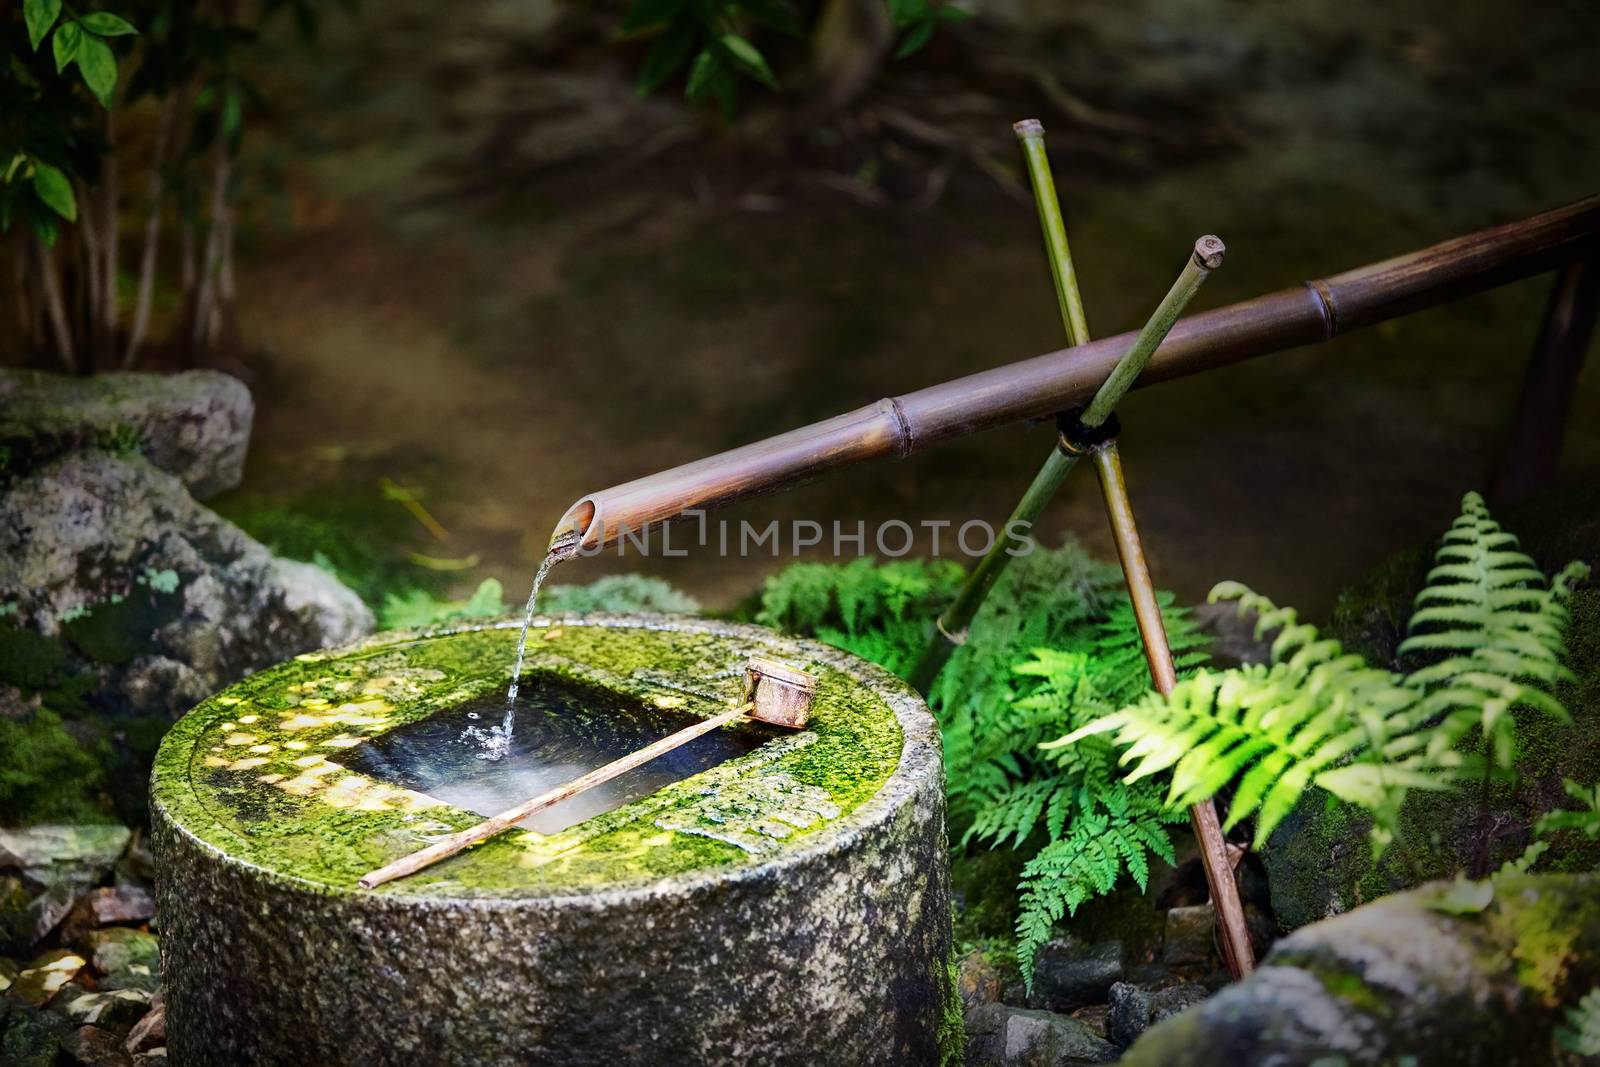 Traditional japanese bamboo fountain Ryoan-ji tsukubai at Ryoan-ji temple in Kyoto, Japan. The basin provided for ritual washing of the hands and mouth.